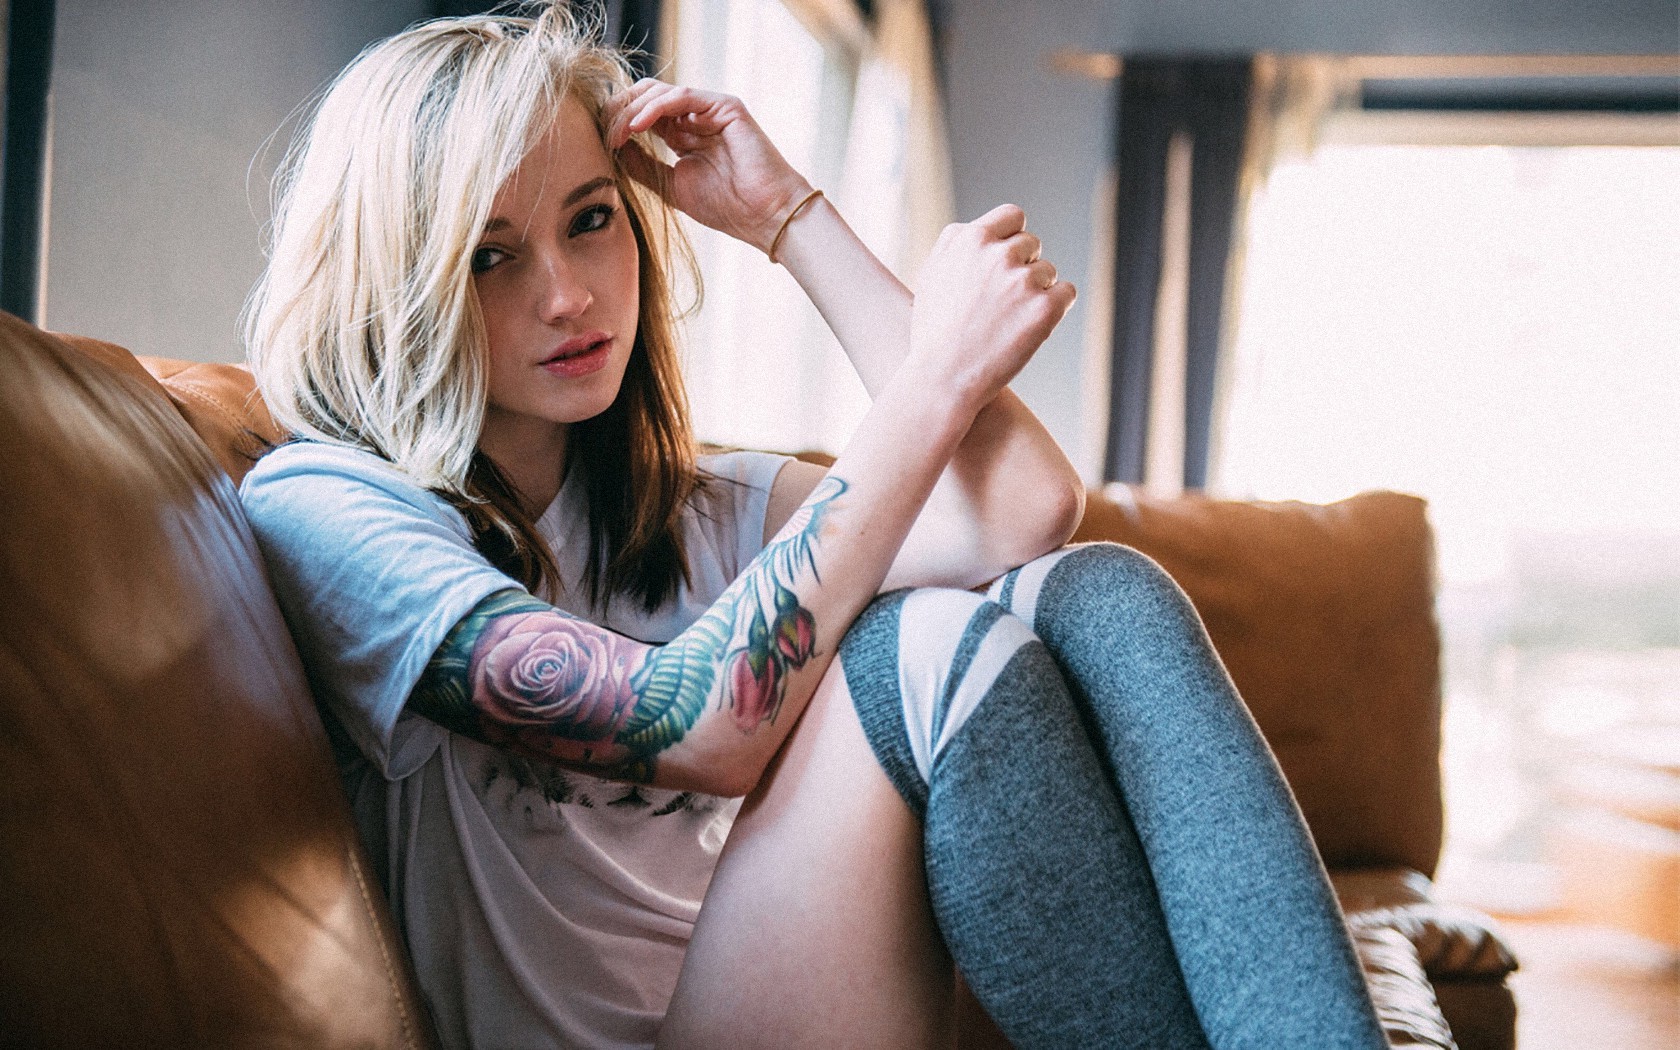 women, Blonde, Looking At Viewer, Tattoo, Knee highs, Couch Wallpaper